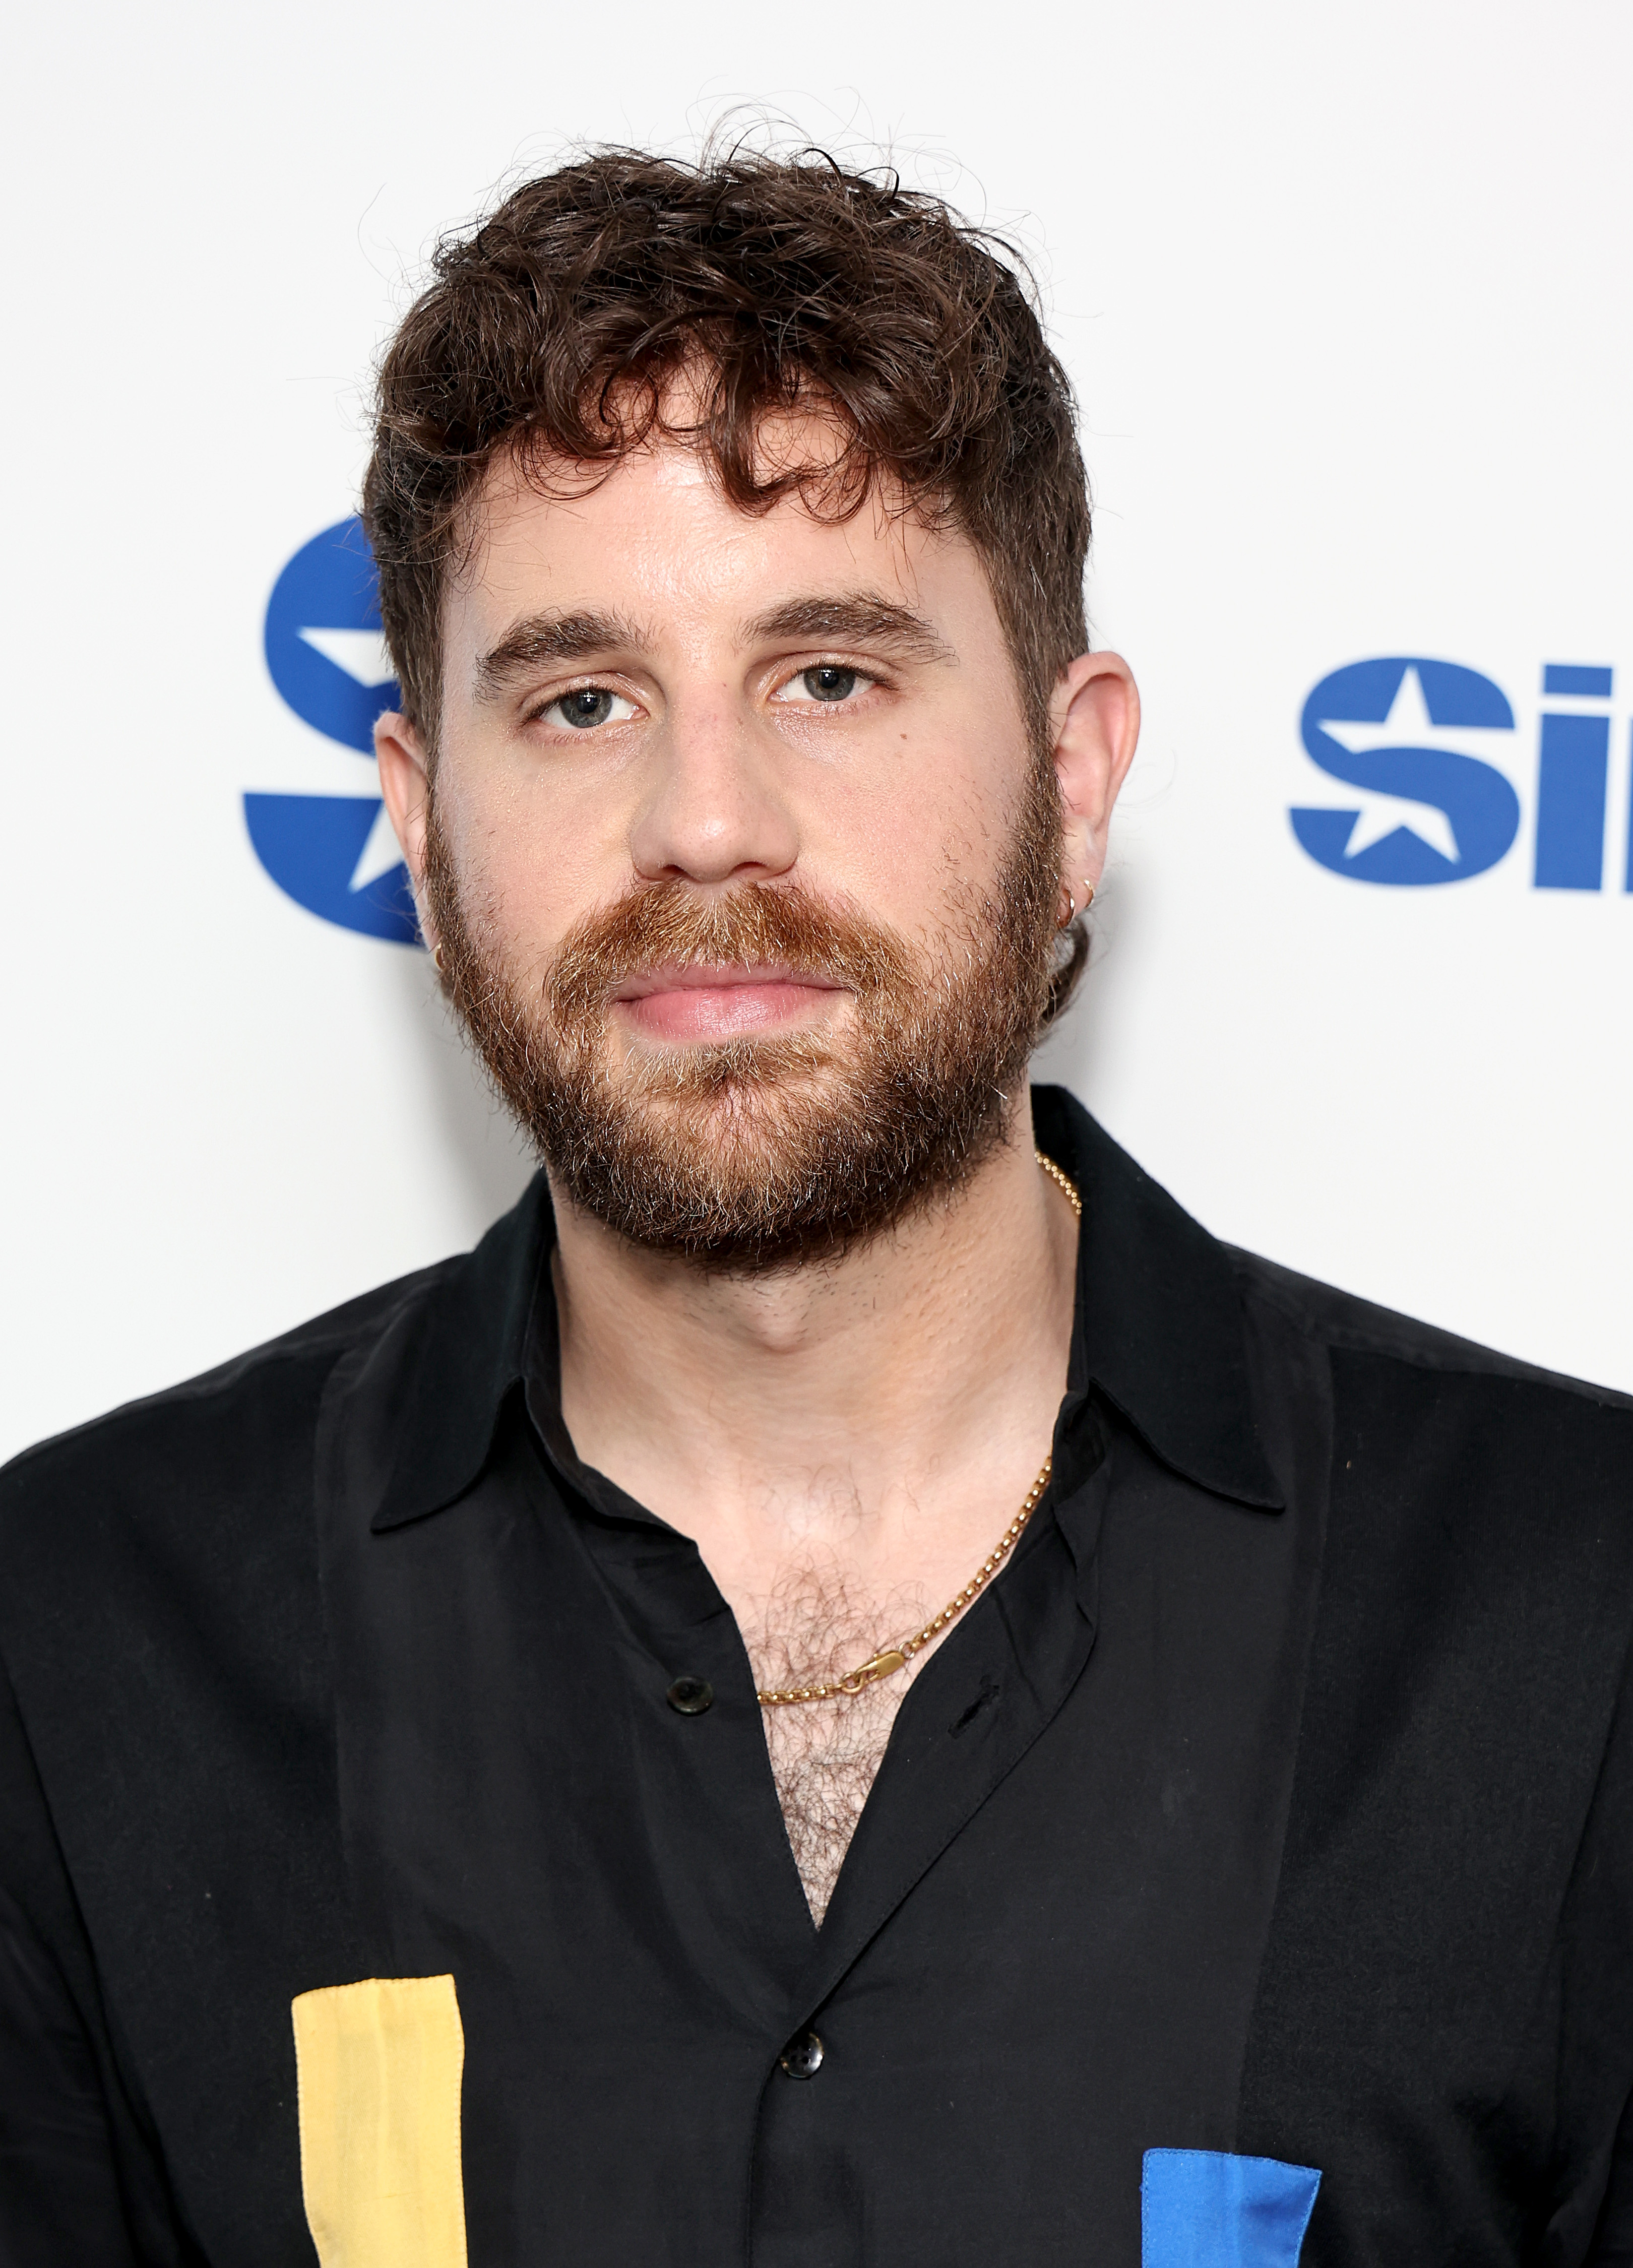 Ben Platt at an event, wearing a black shirt with color block details and a gold chain necklace